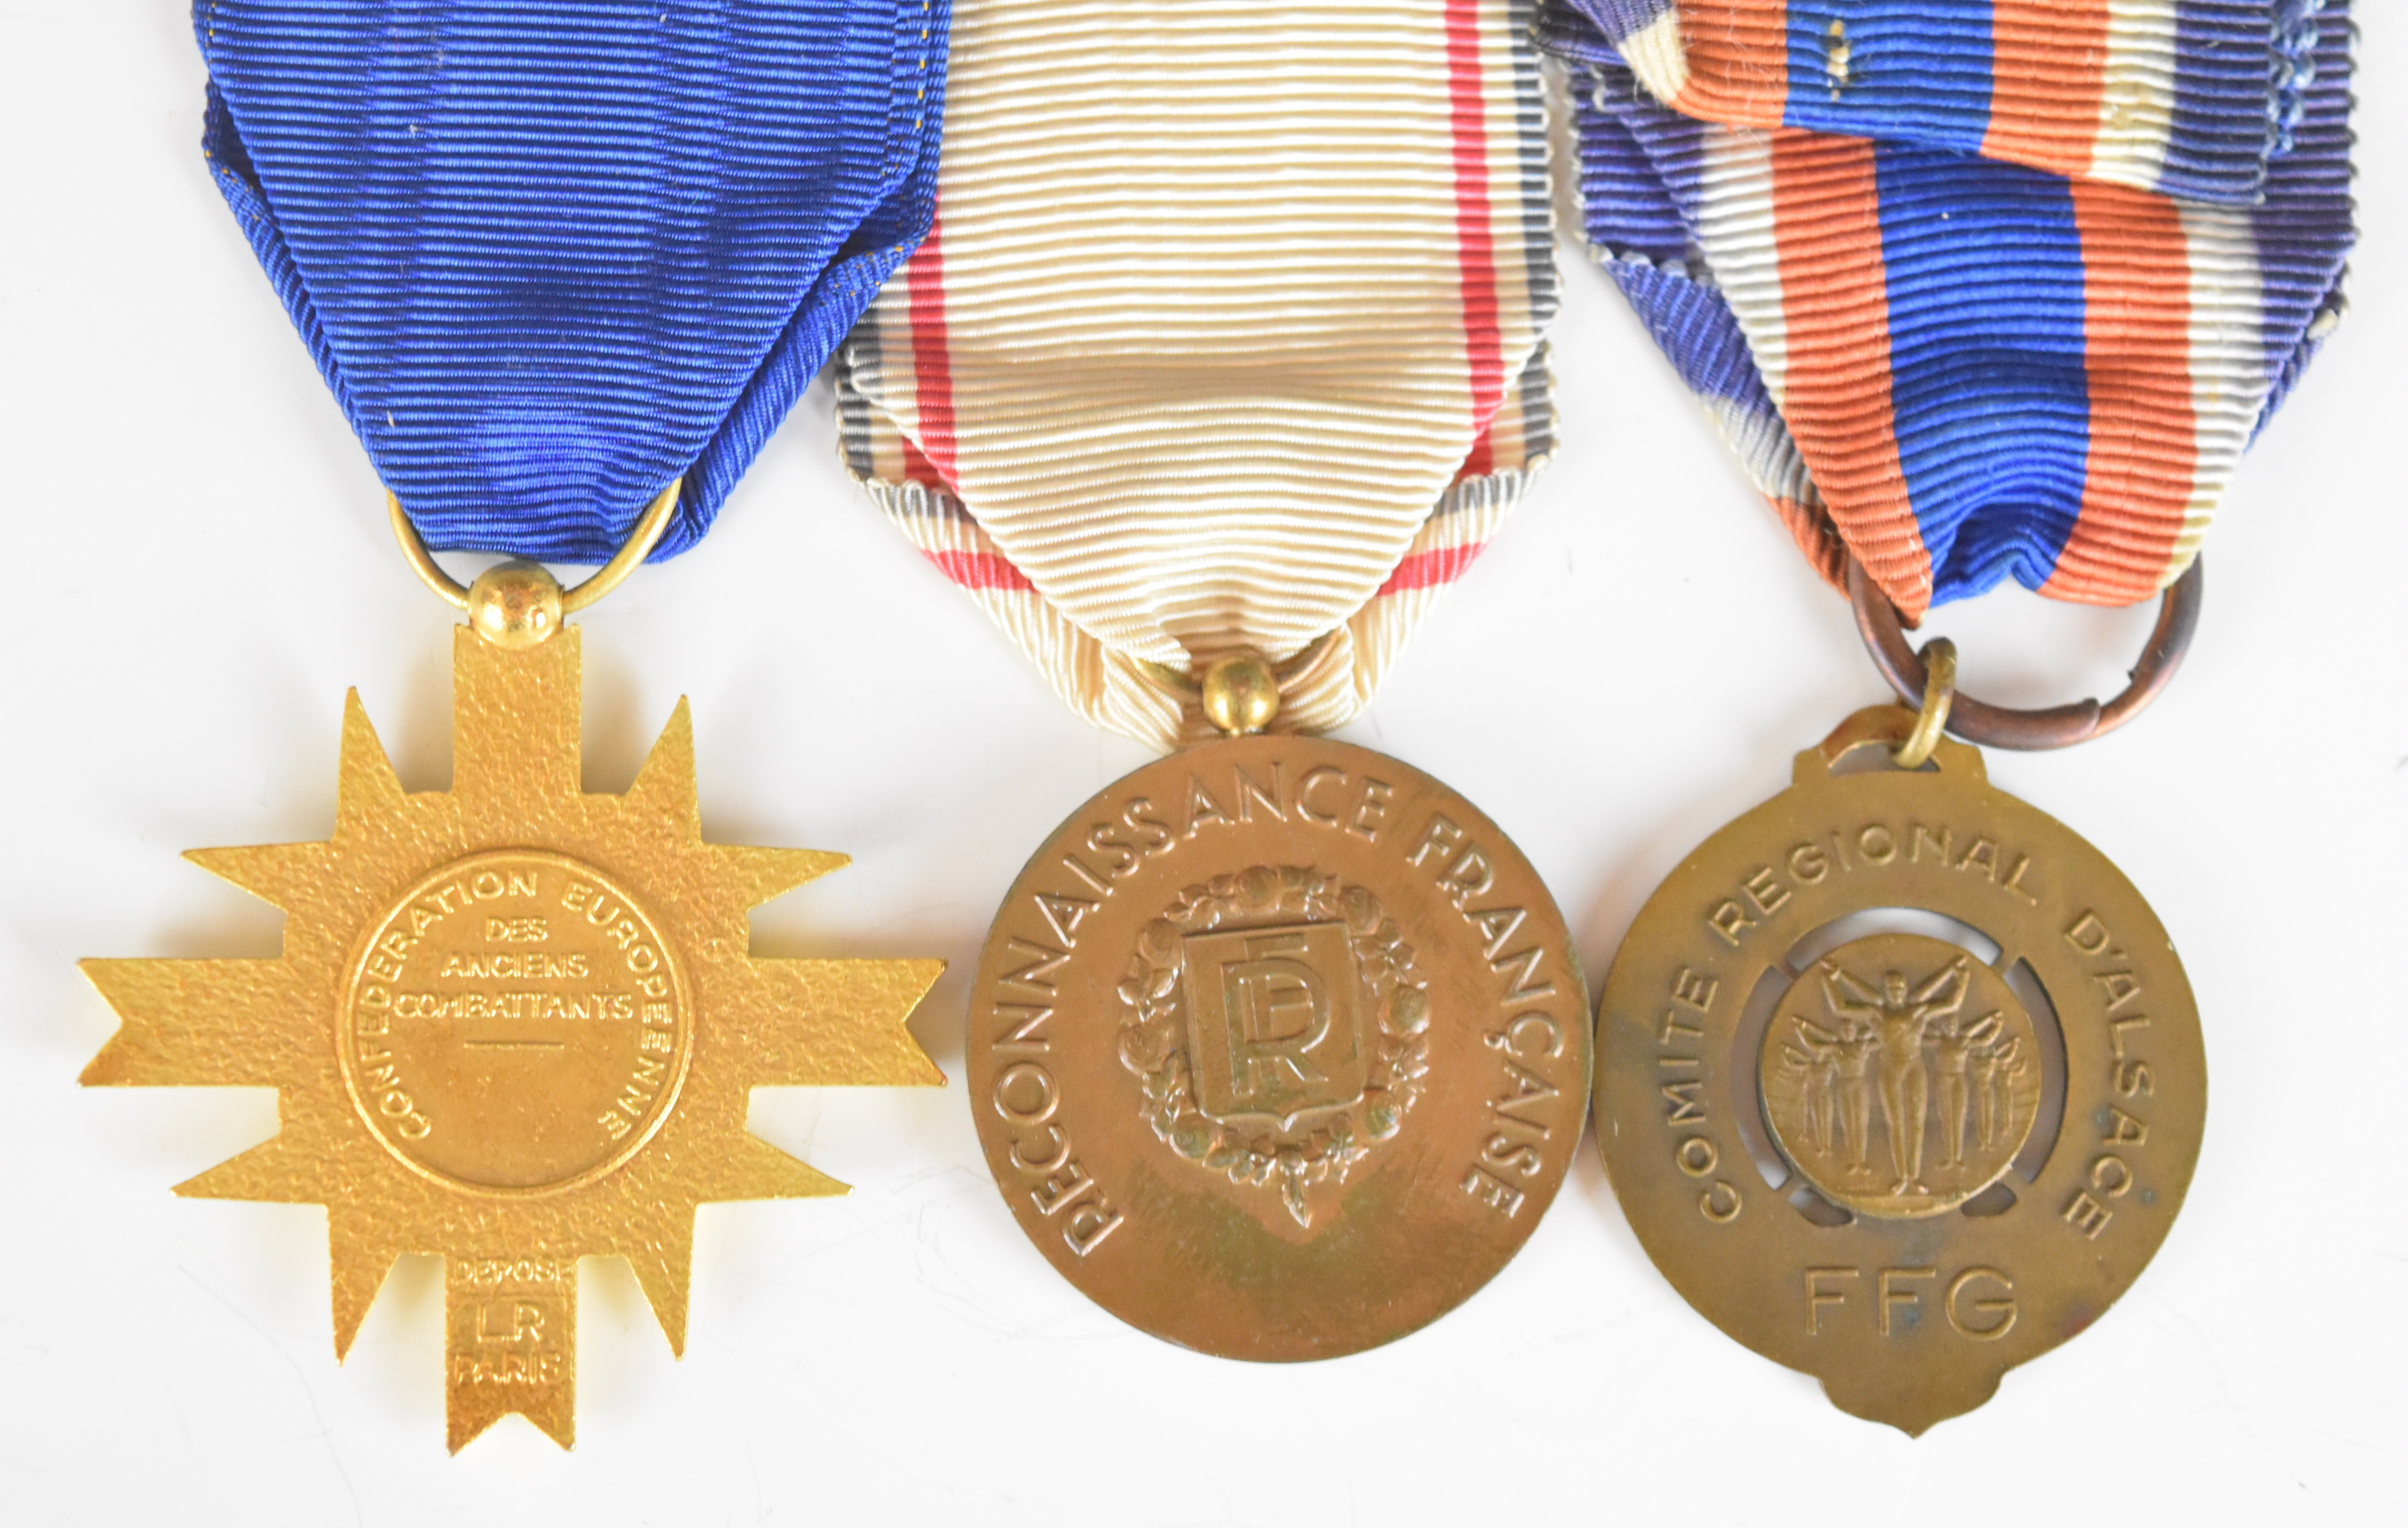 Ten French WW2 era medals including Gratitude Medal, Alsace Medal, Railway Medal, Red Cross Medal - Image 5 of 9